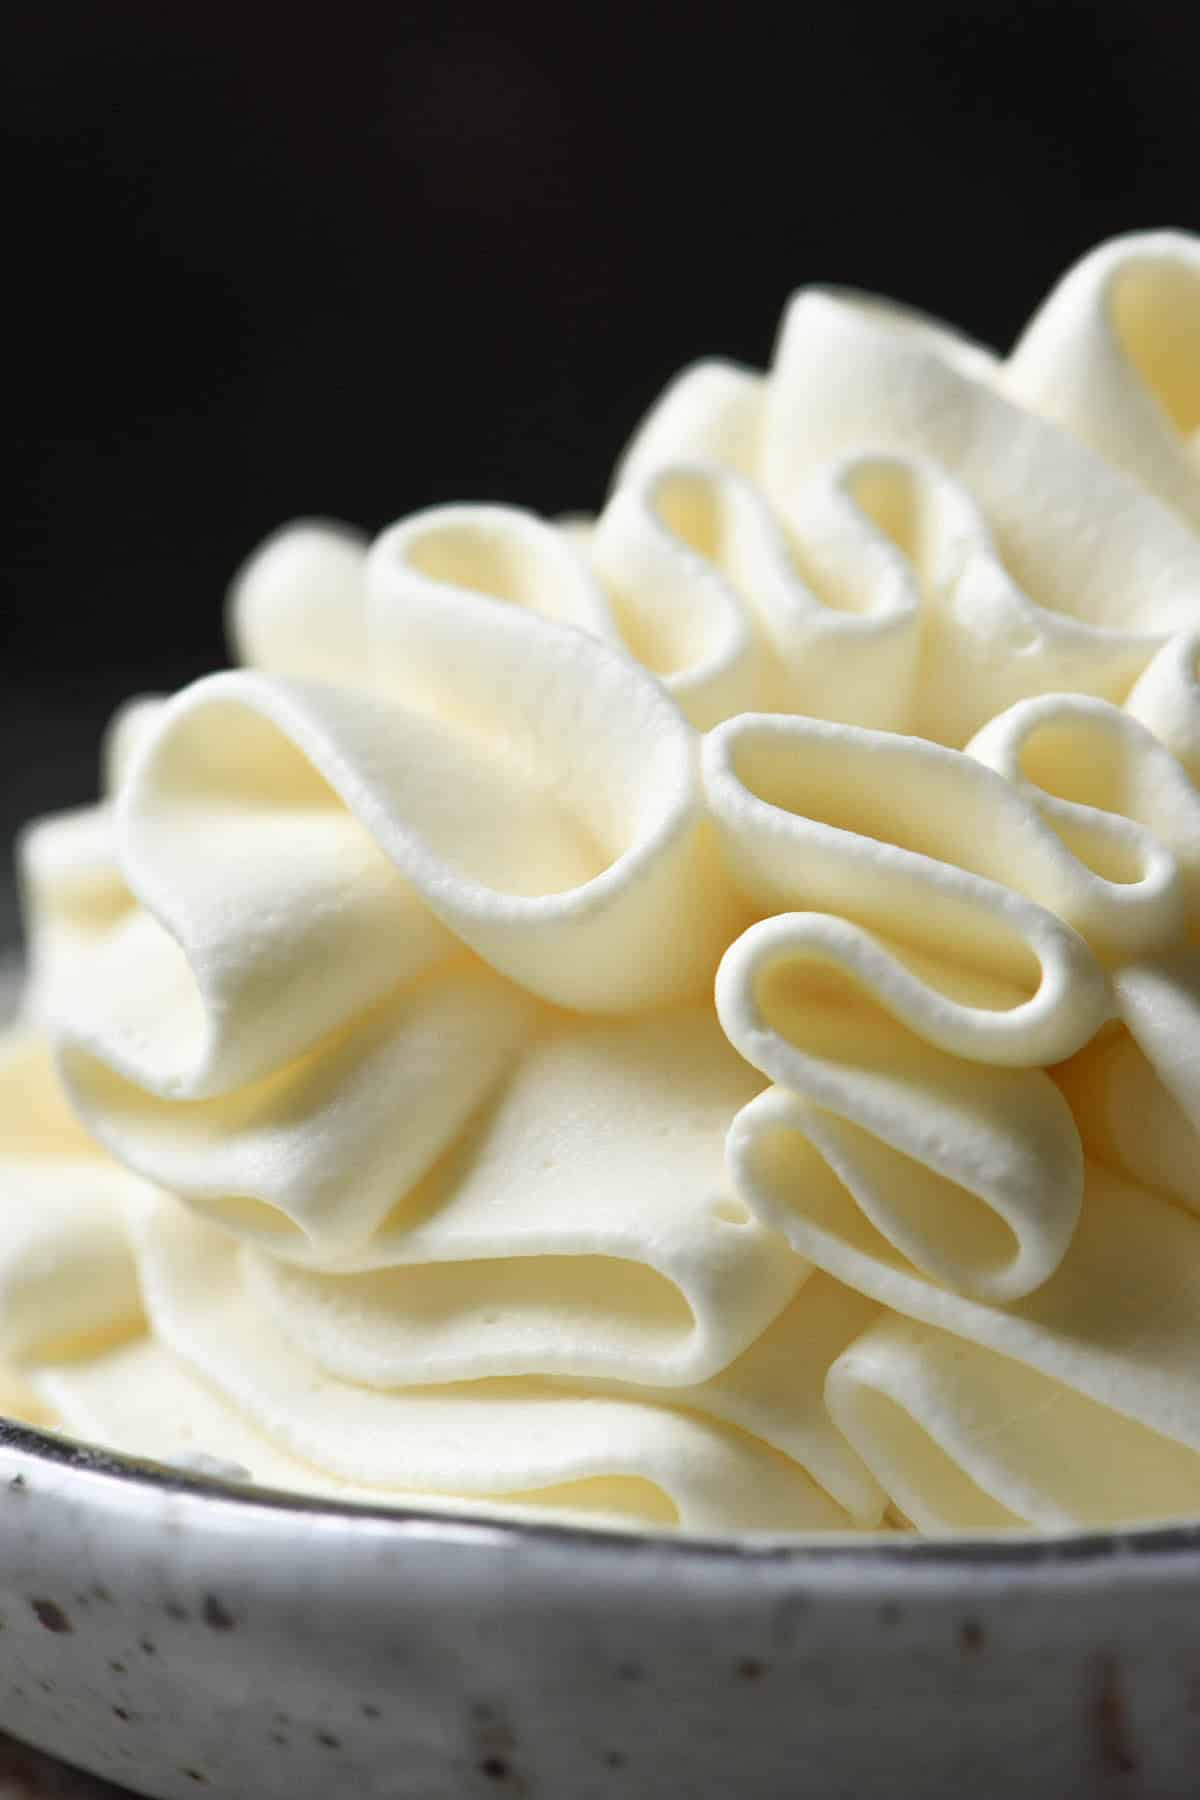 A side on macro image of lactose free whipping cream piped into a small white ceramic bowl against a dark backdrop